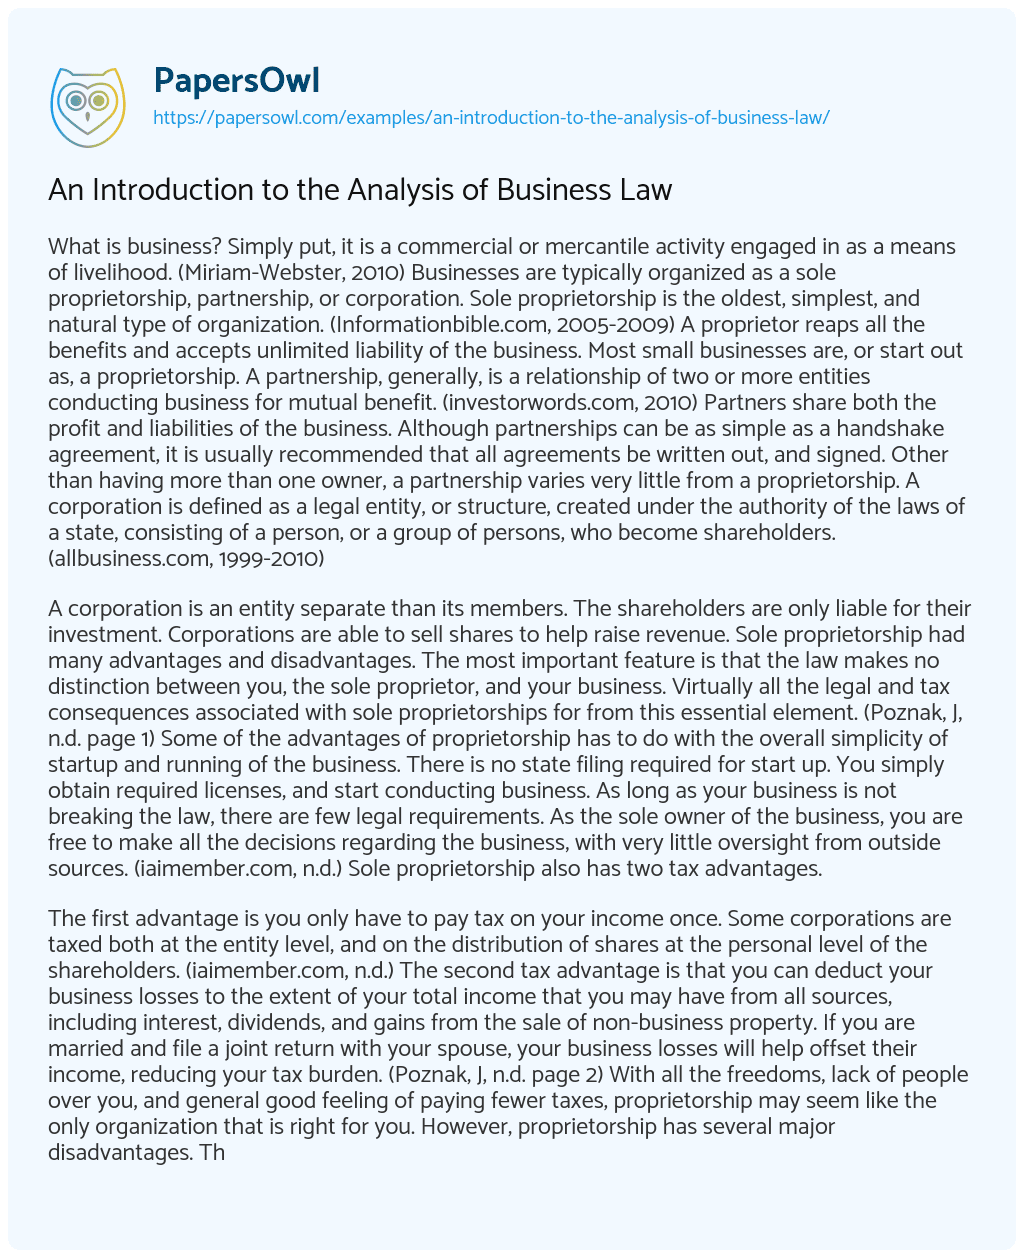 Essay on An Introduction to the Analysis of Business Law